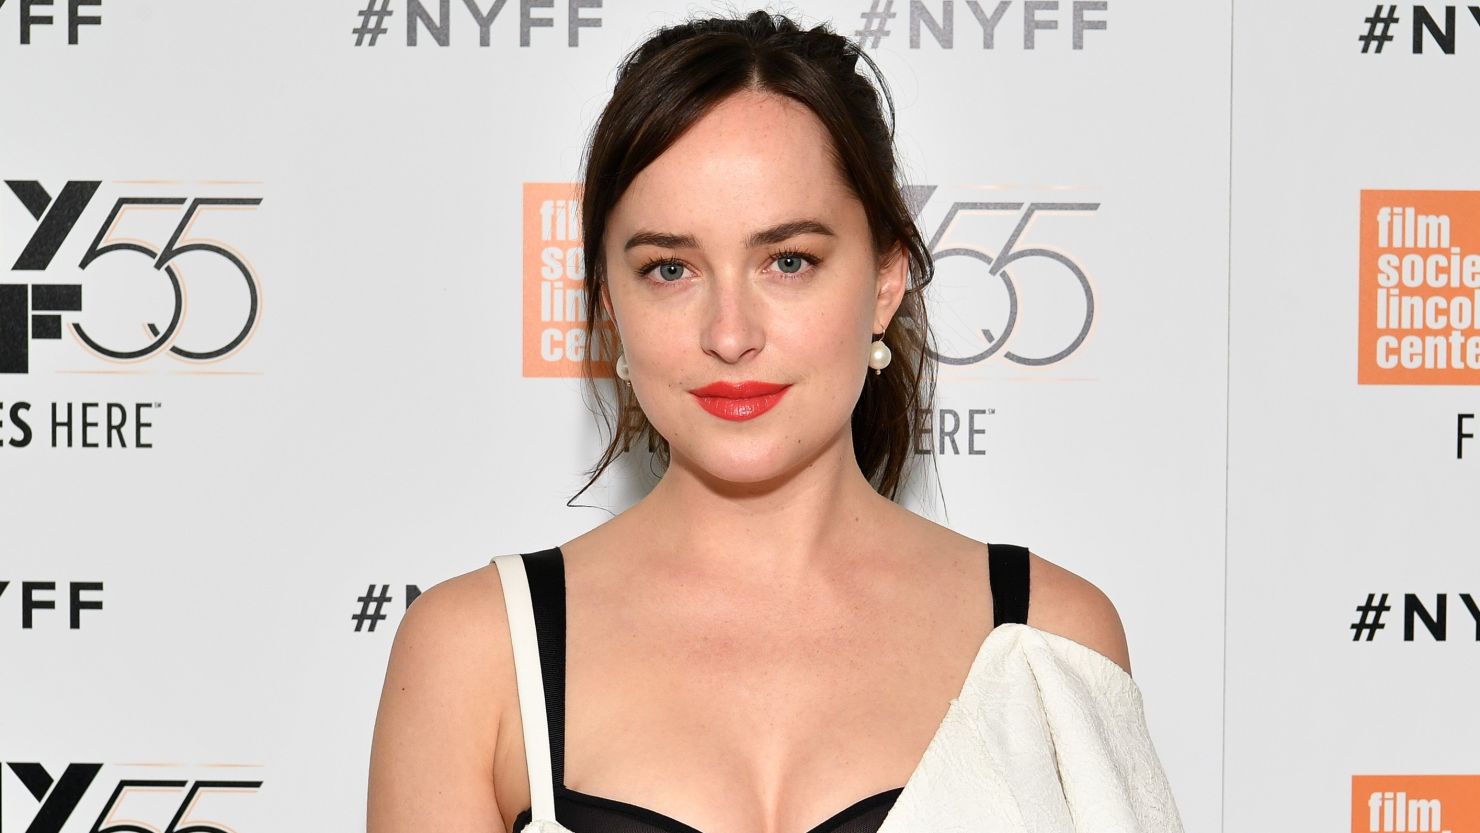 Actress Dakota Johnson wants to share stories from survivors of sexual violence and harassment. 